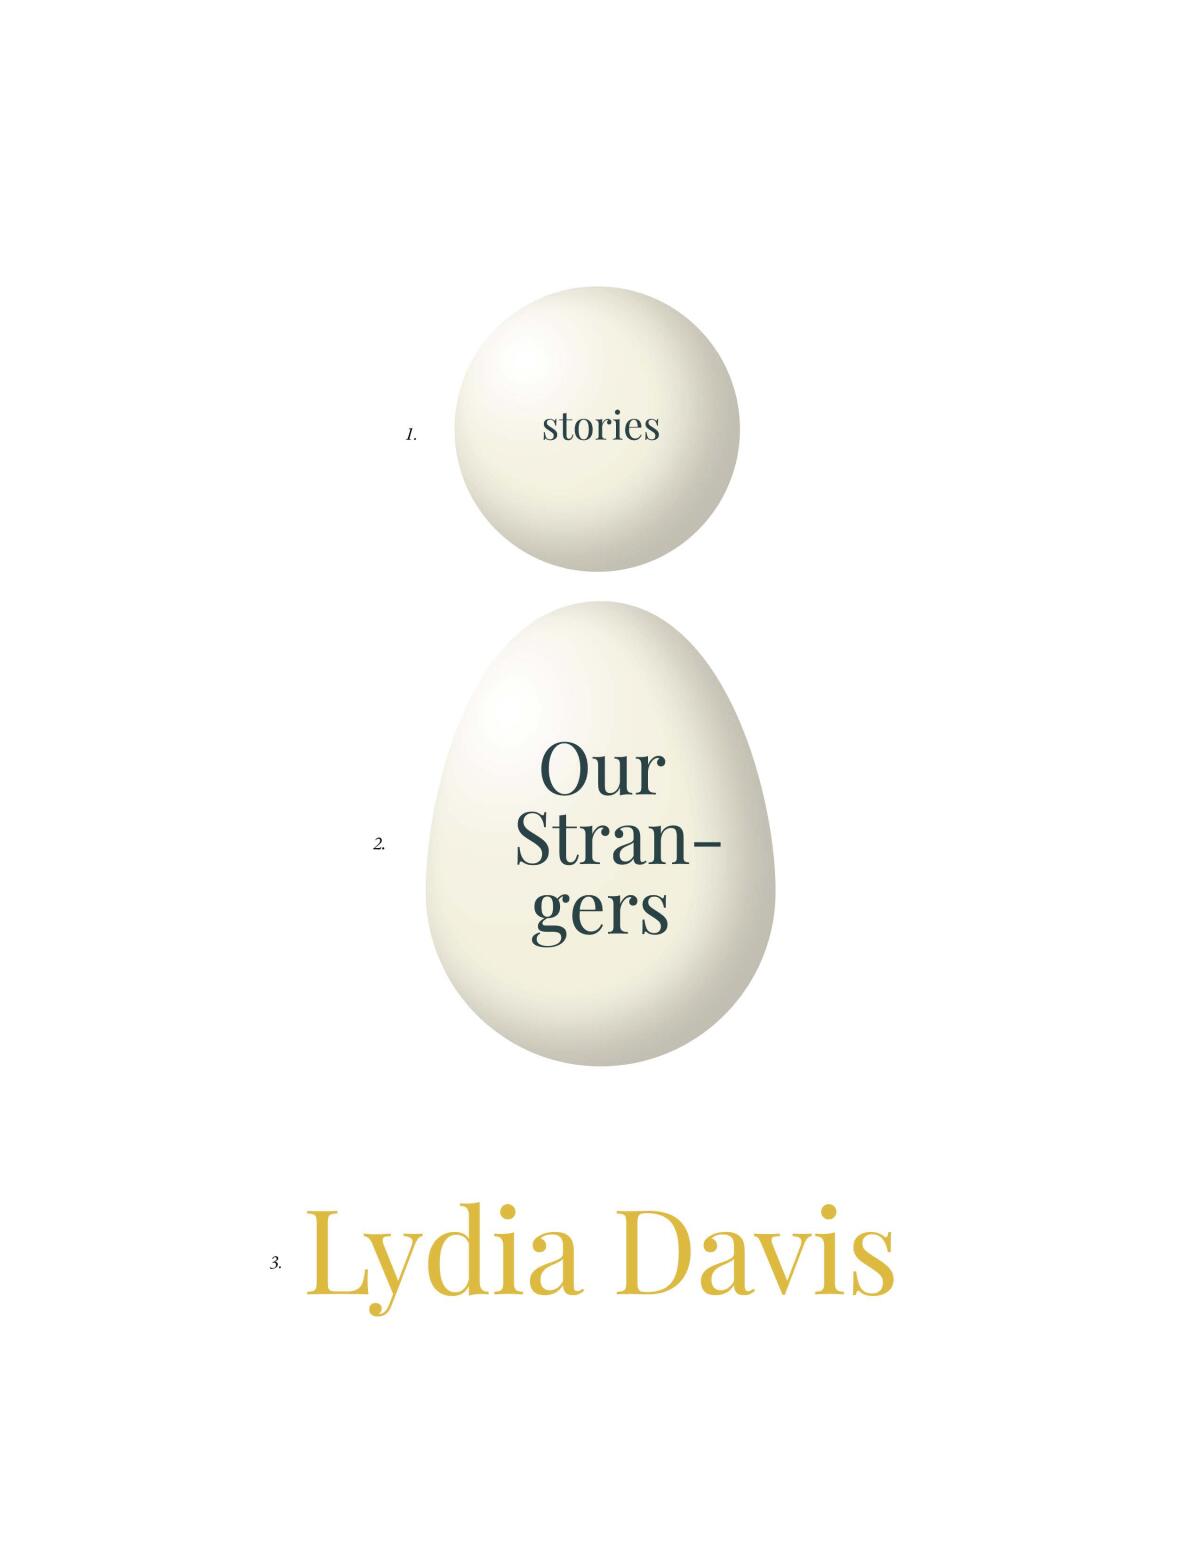 "Our Strangers: Stories," by Lydia Davis